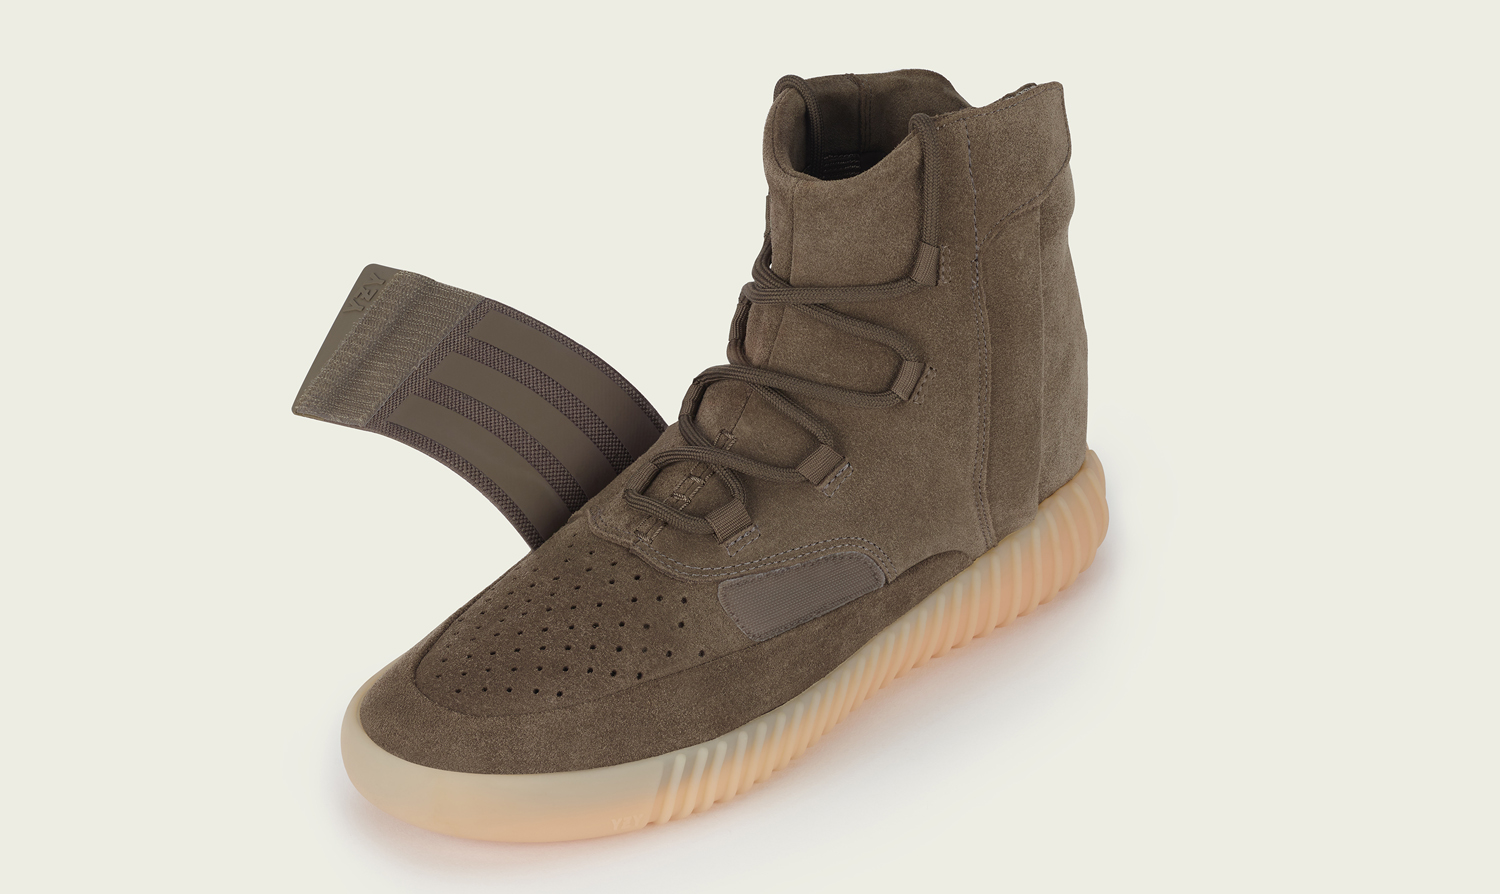 "Chocolate" Adidas Yeezy 750 Glow in the or Not? |